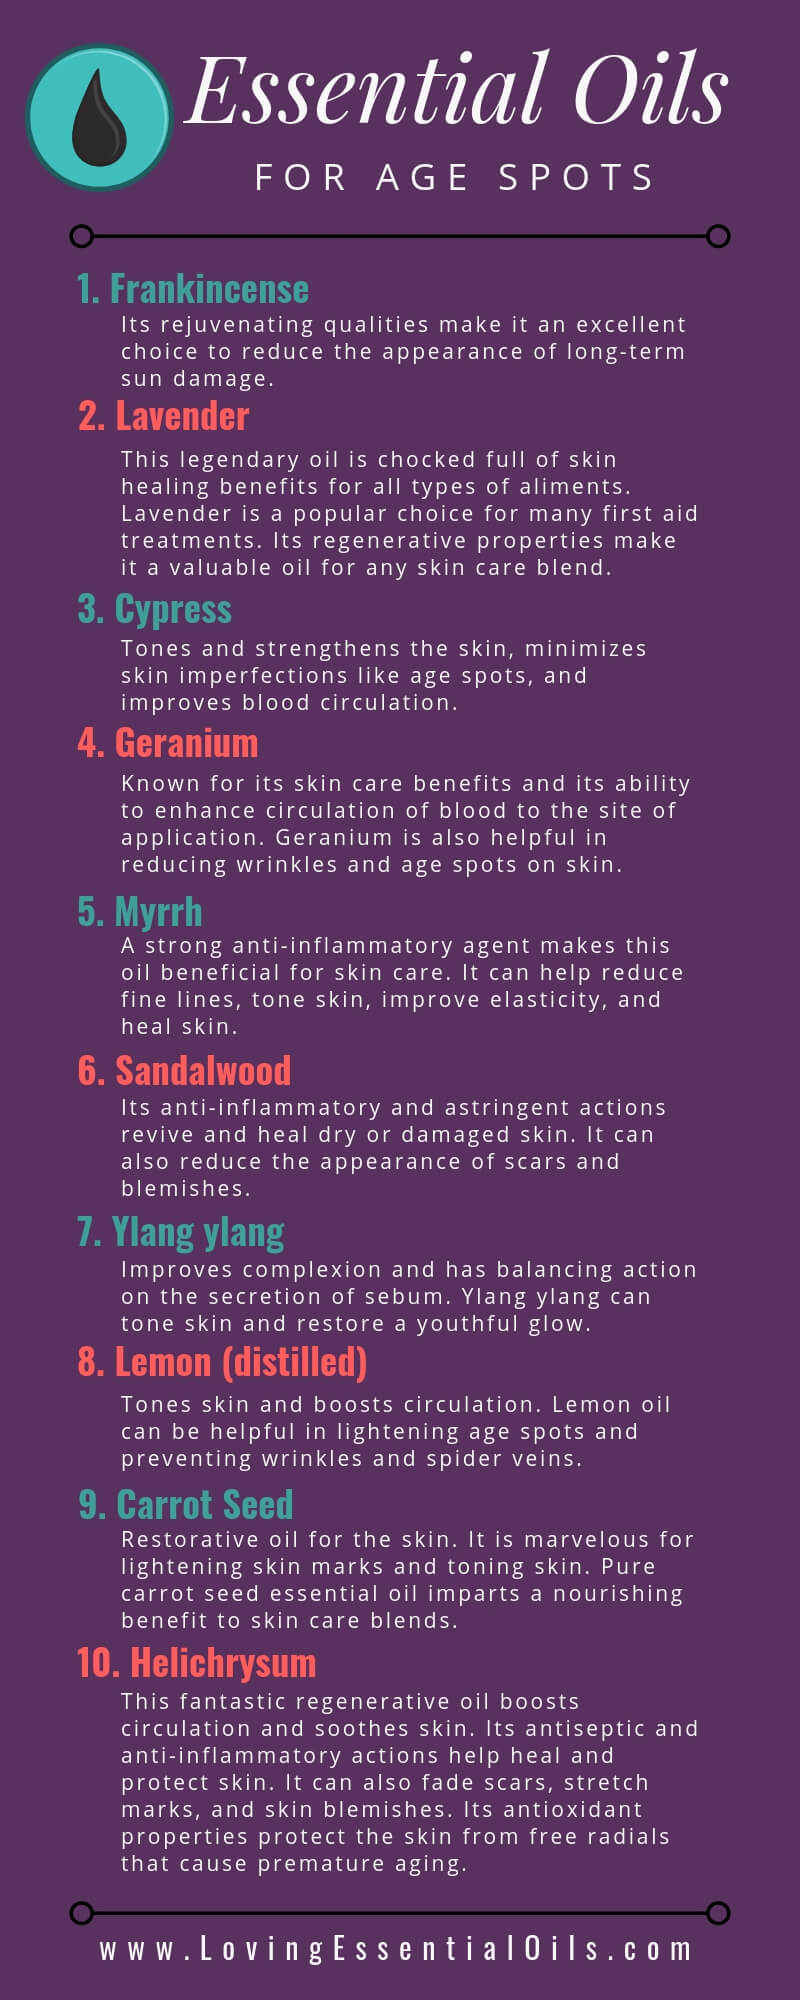 Essential oils for age spots pinterest by Loving Essential Oils